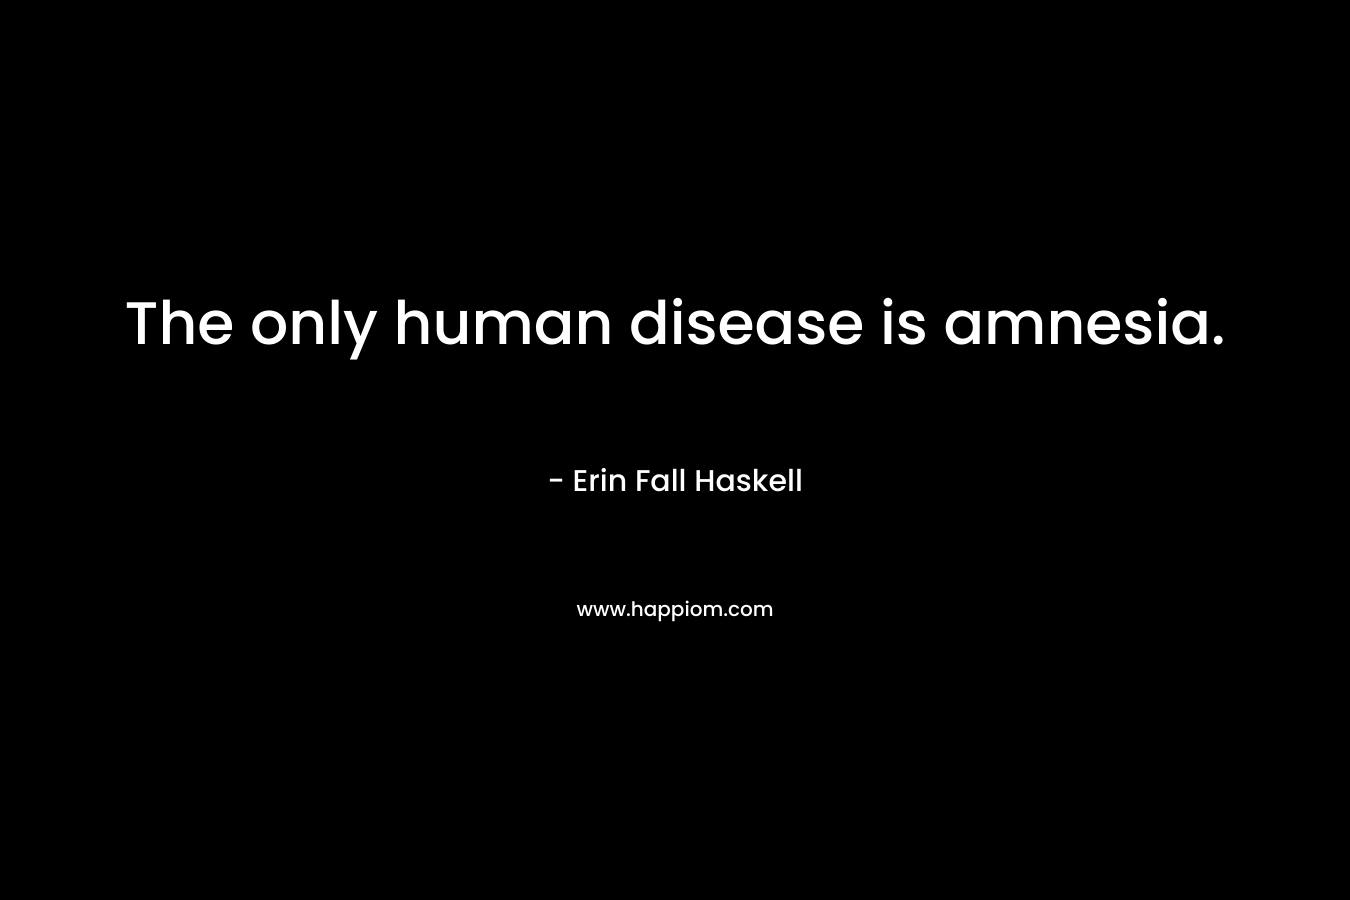 The only human disease is amnesia.